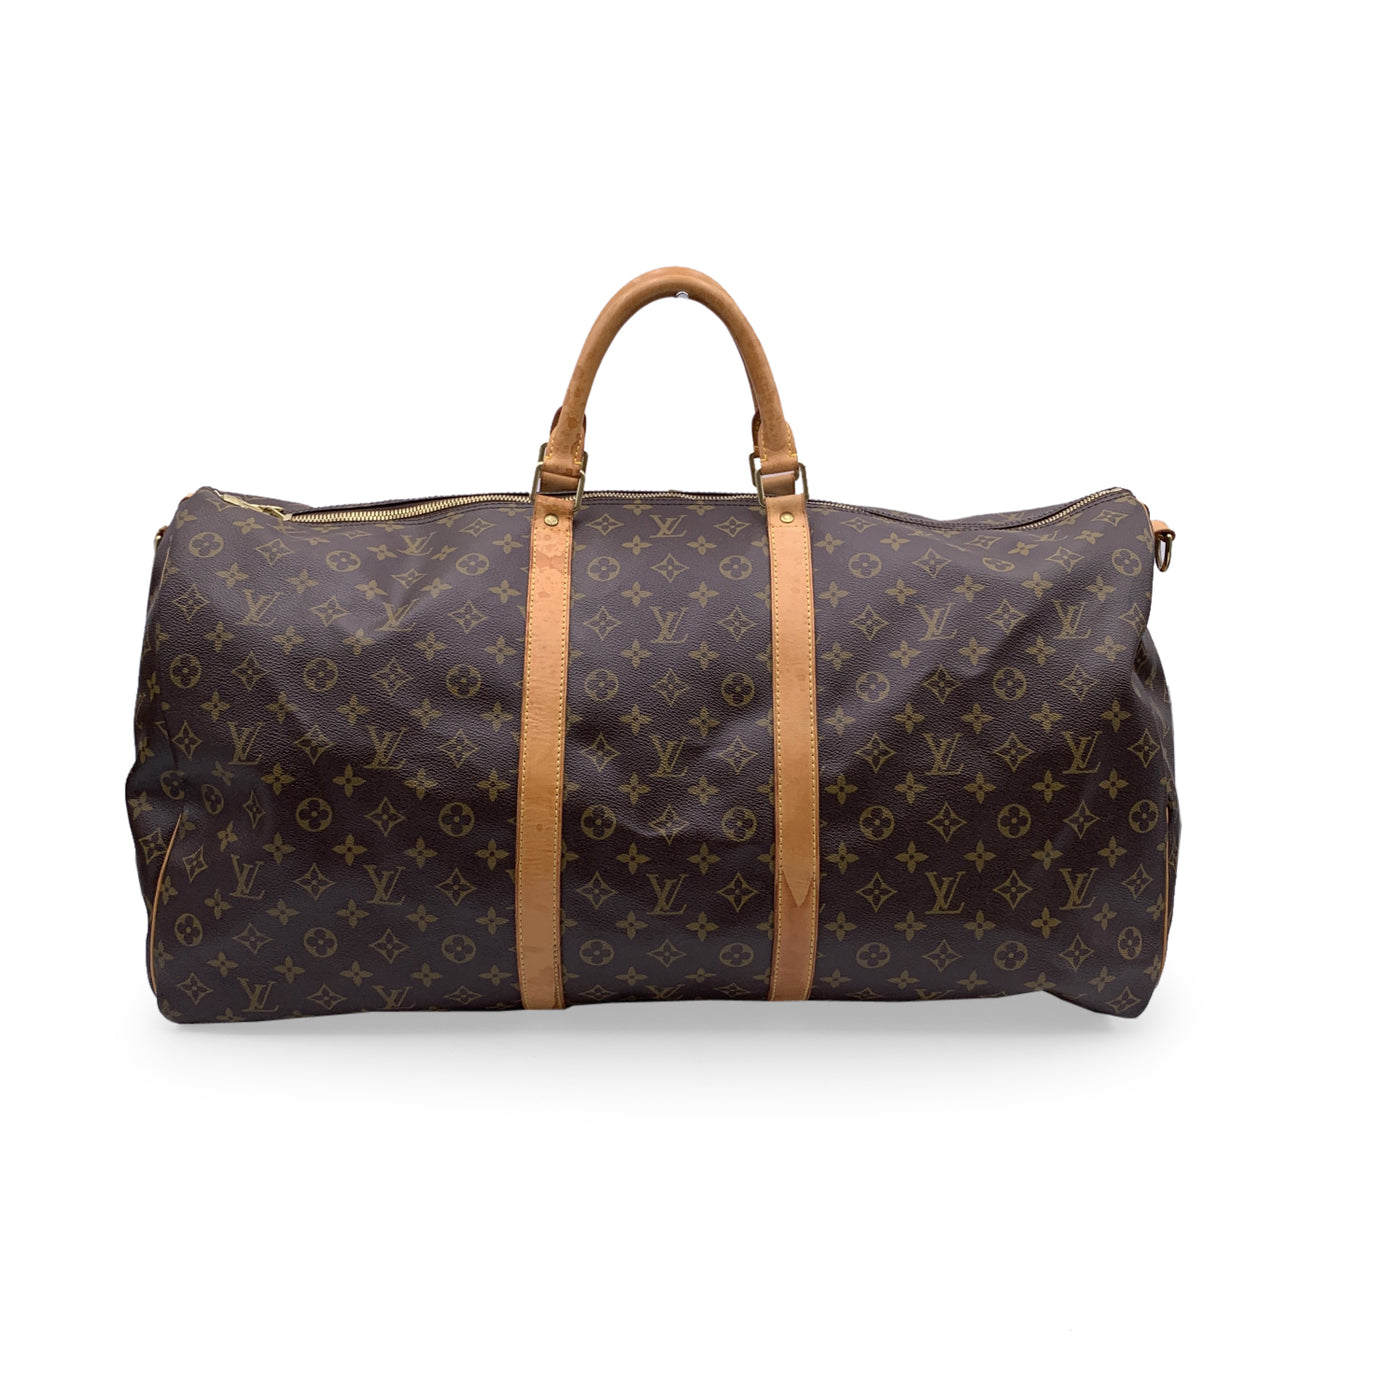 Keepall 60 Bandouliere Authentic PreOwned  The Lady Bag